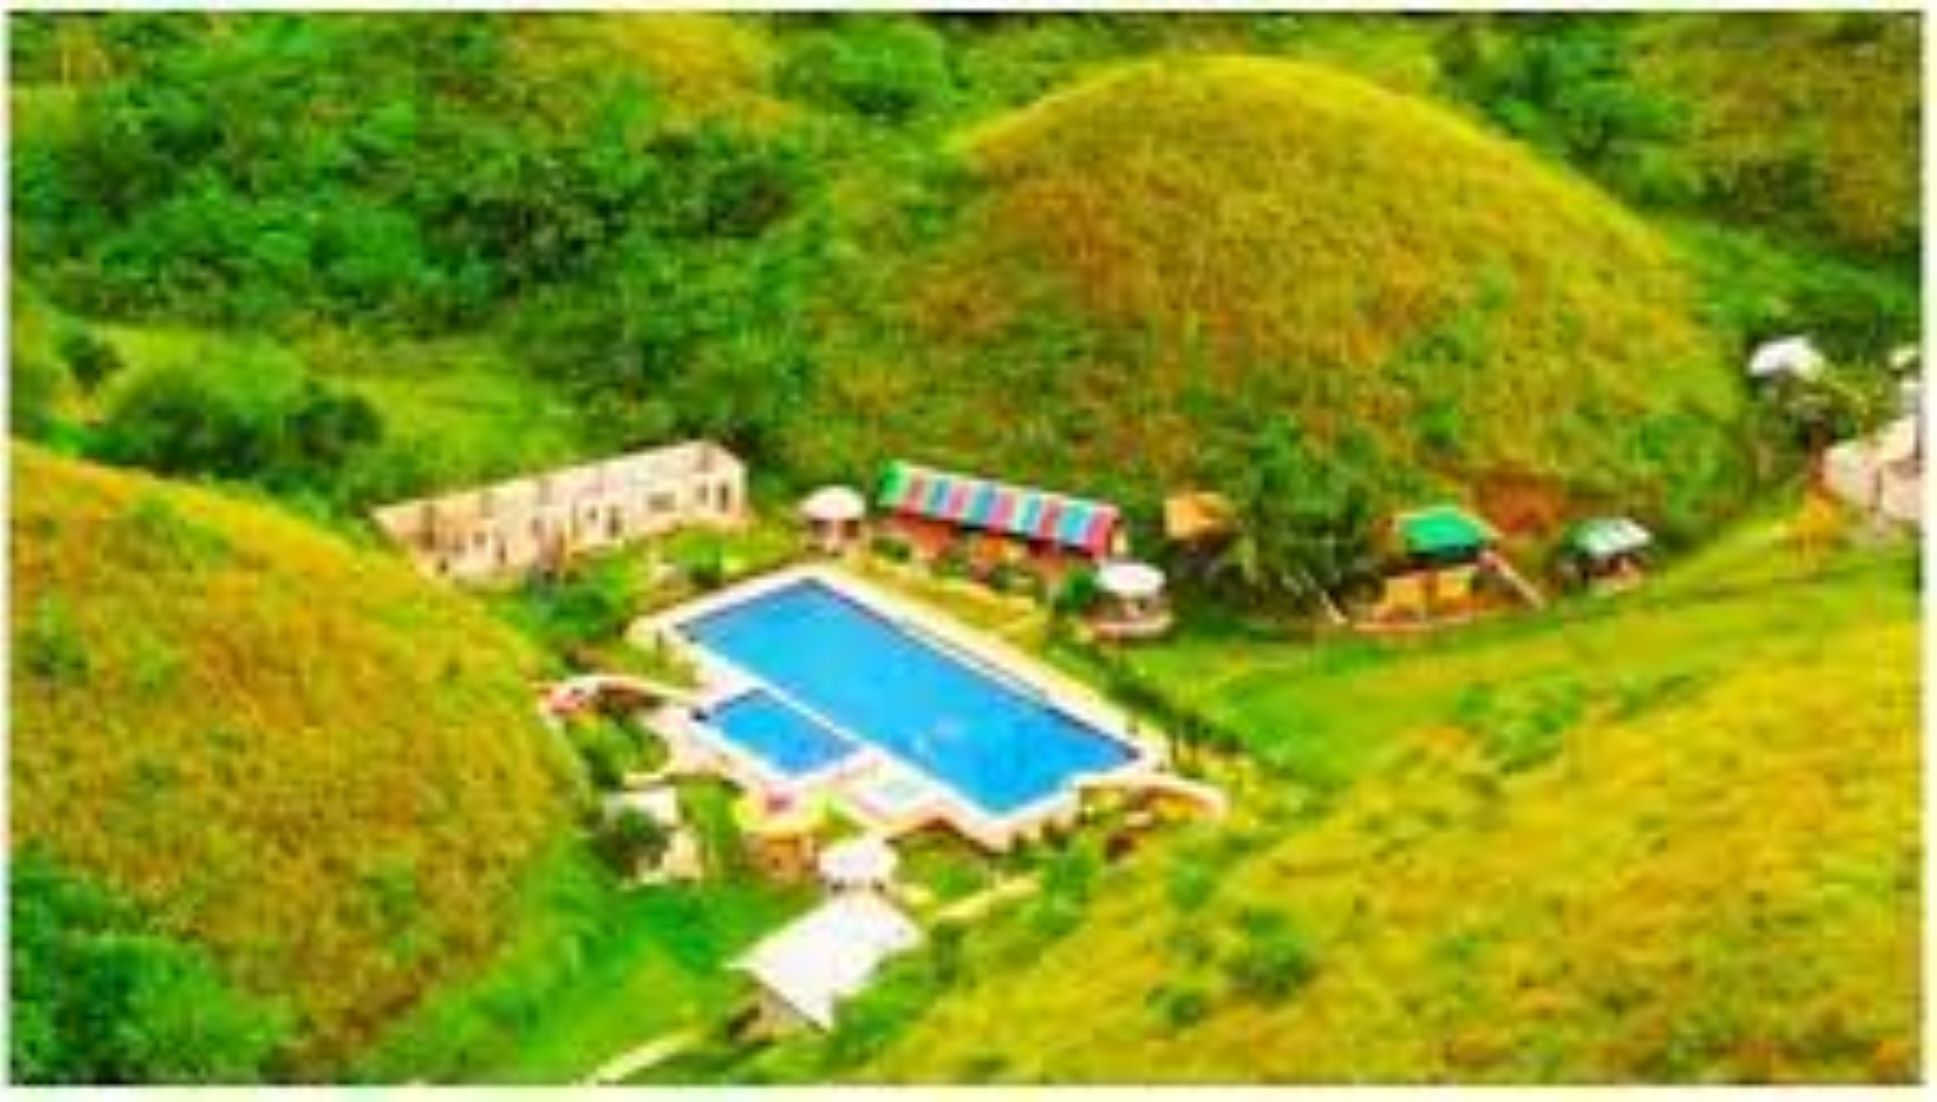 Private Resort Within Protected Chocolate Hills Stirs Up Controversy In Philippines